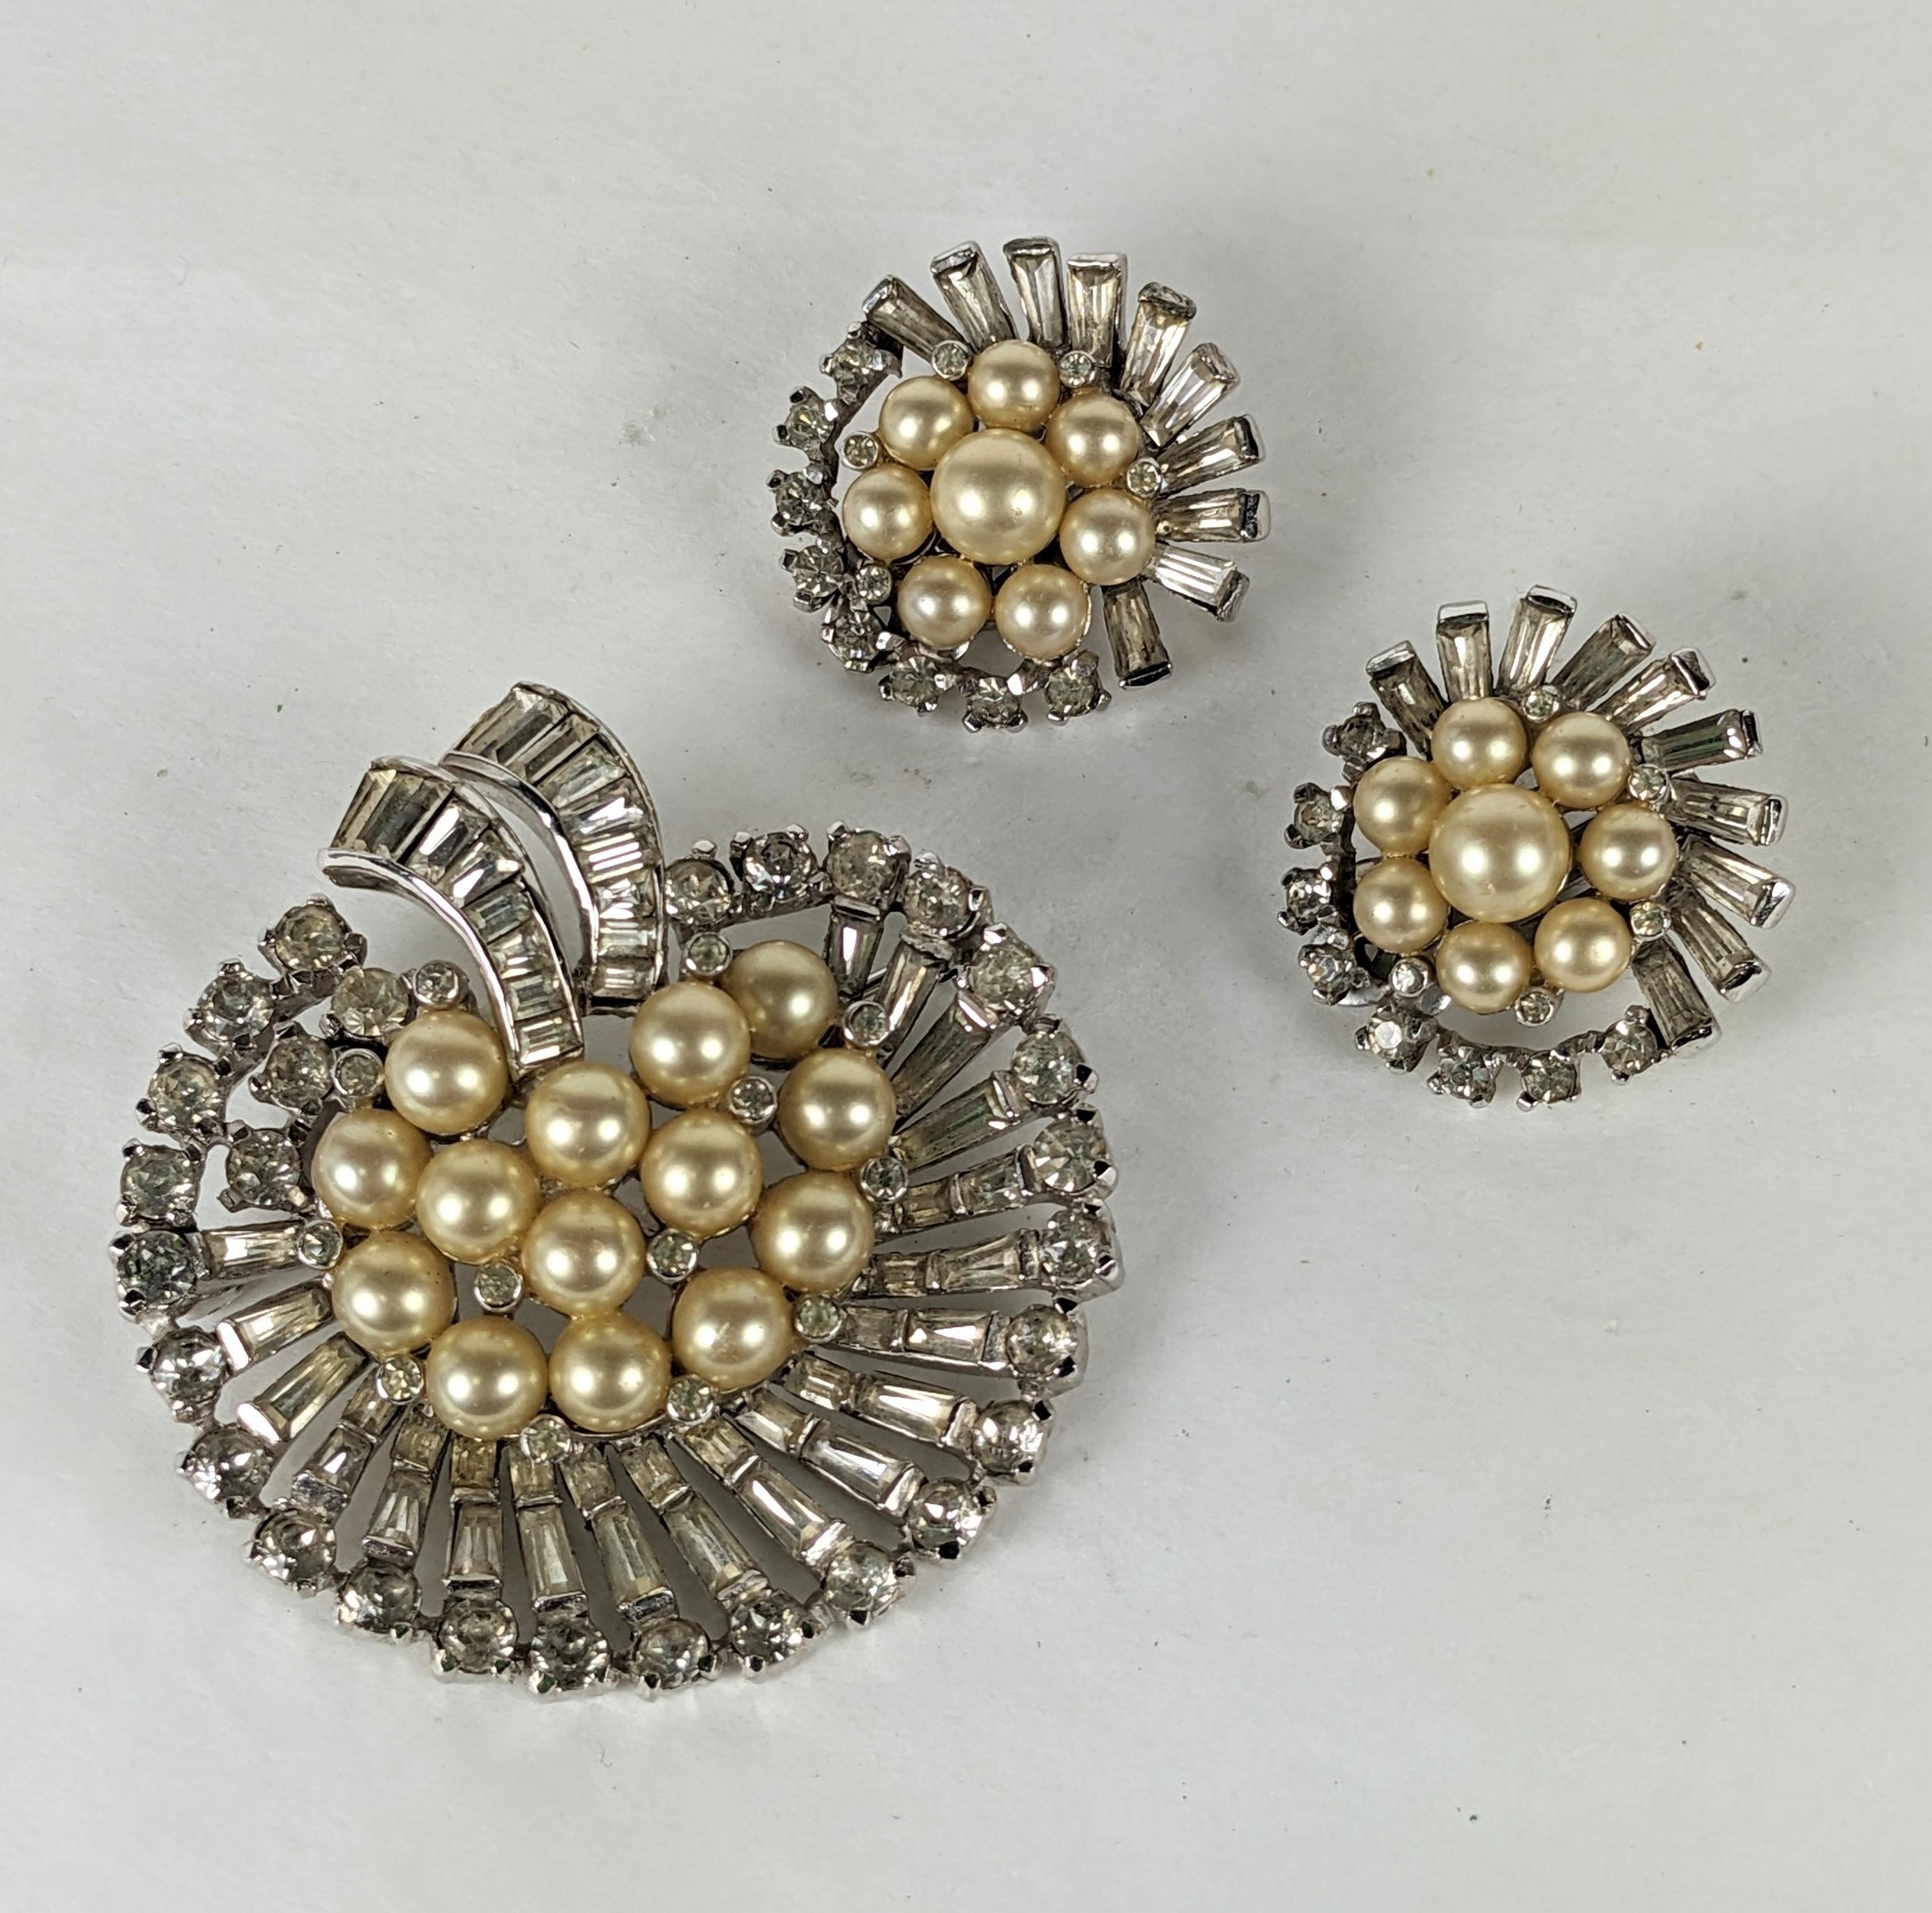 Elegant Jomaz Pearl and Pave Baguette Brooch and Earrings from the 1950's. Swirl design brooch with elaborate round and baguette crystal work. Matching clip earrings. 
Jomaz by Mazer. 2